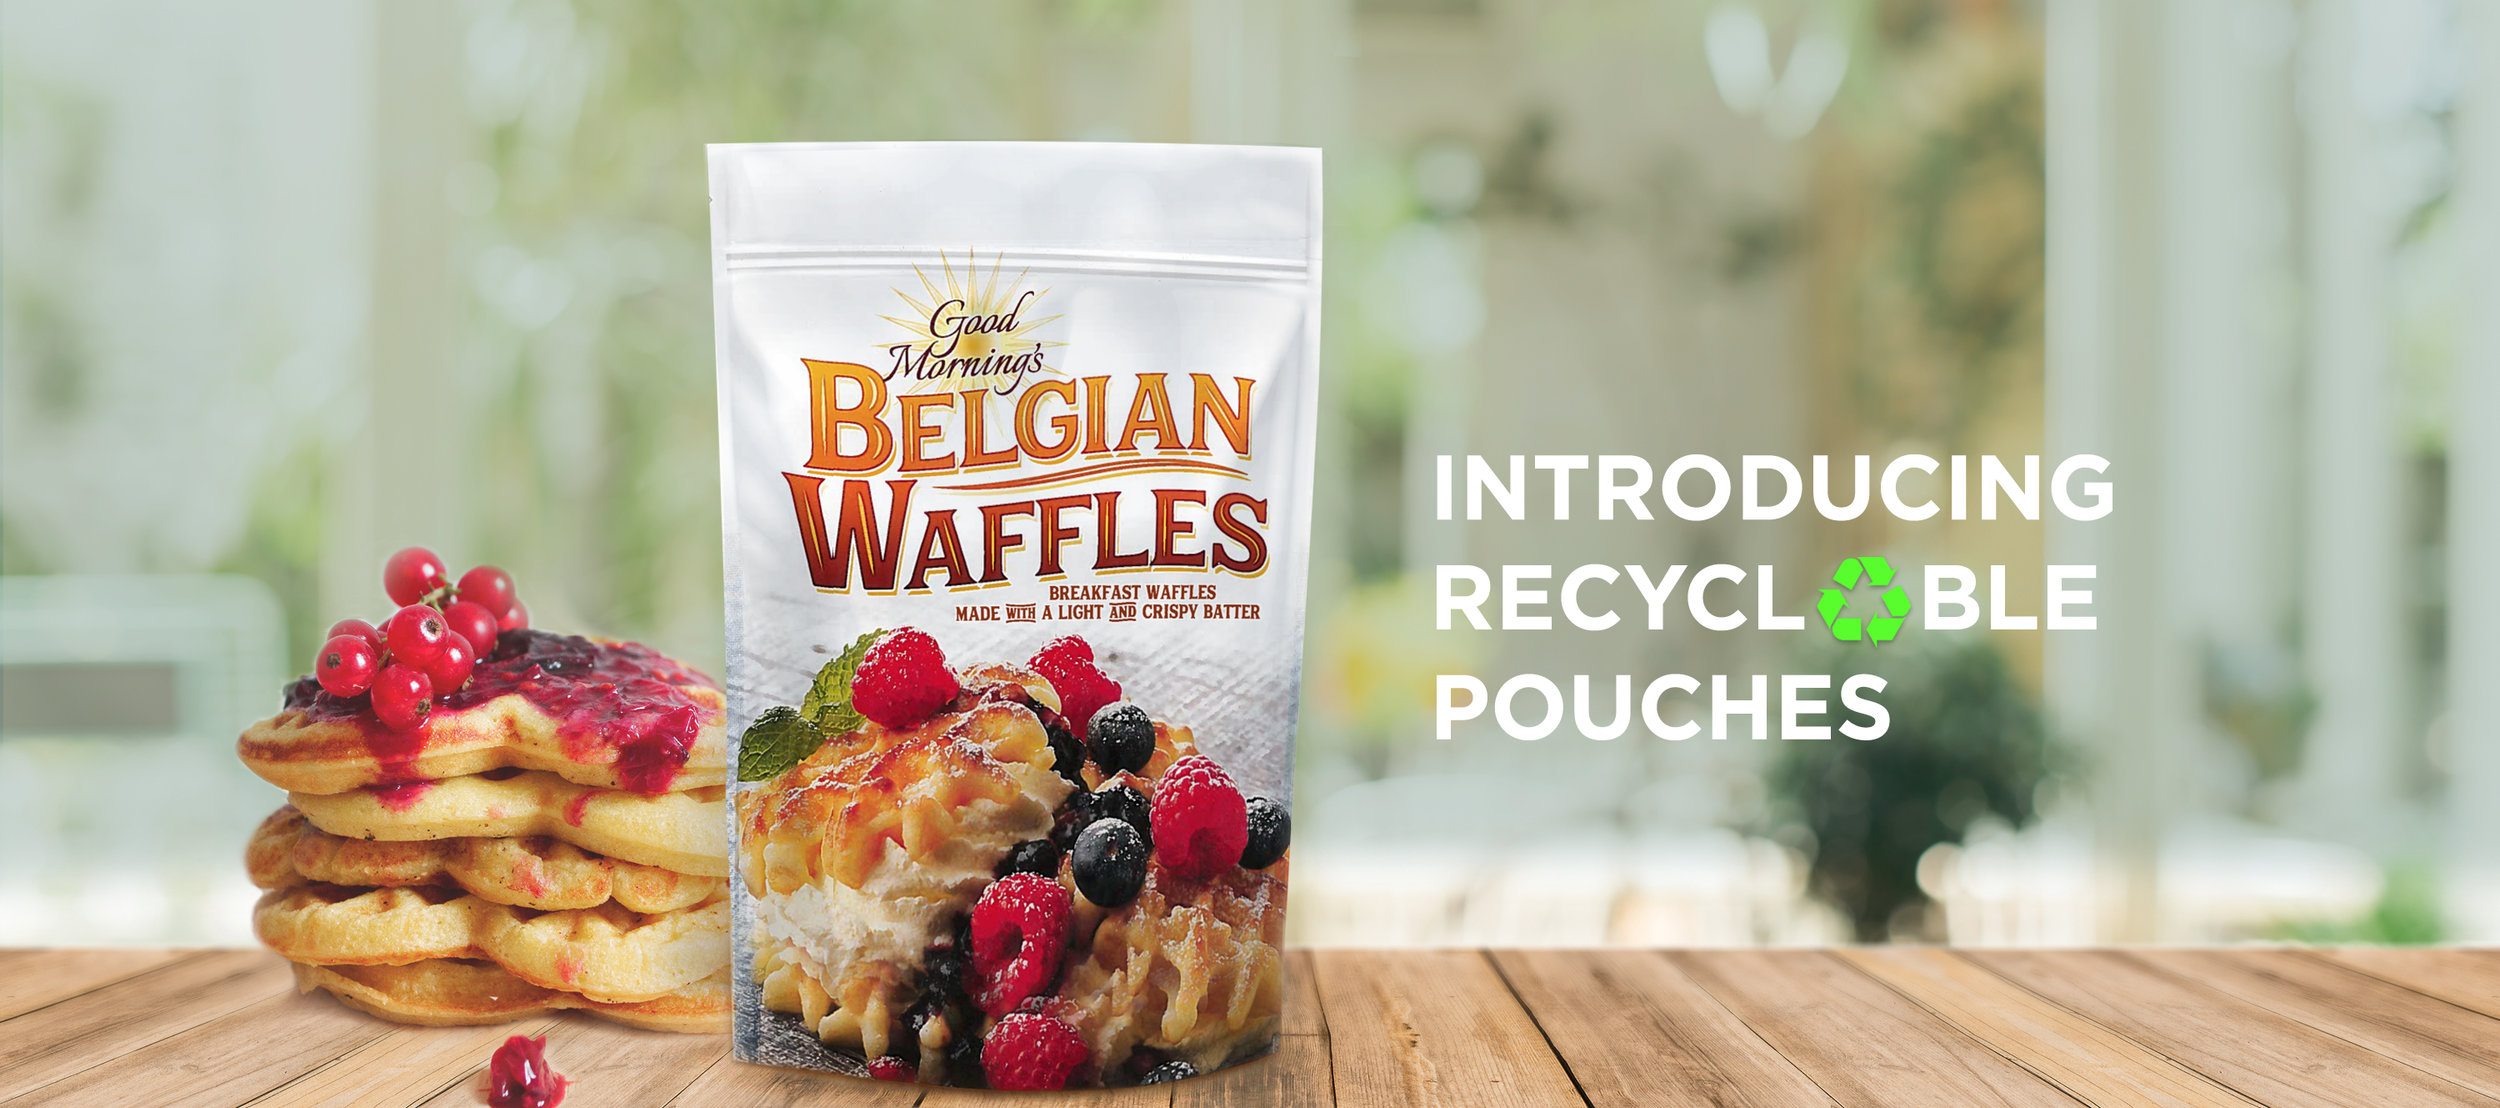 Image of Belgina Waffle packaging readying "Introducing Recyclable Puches"